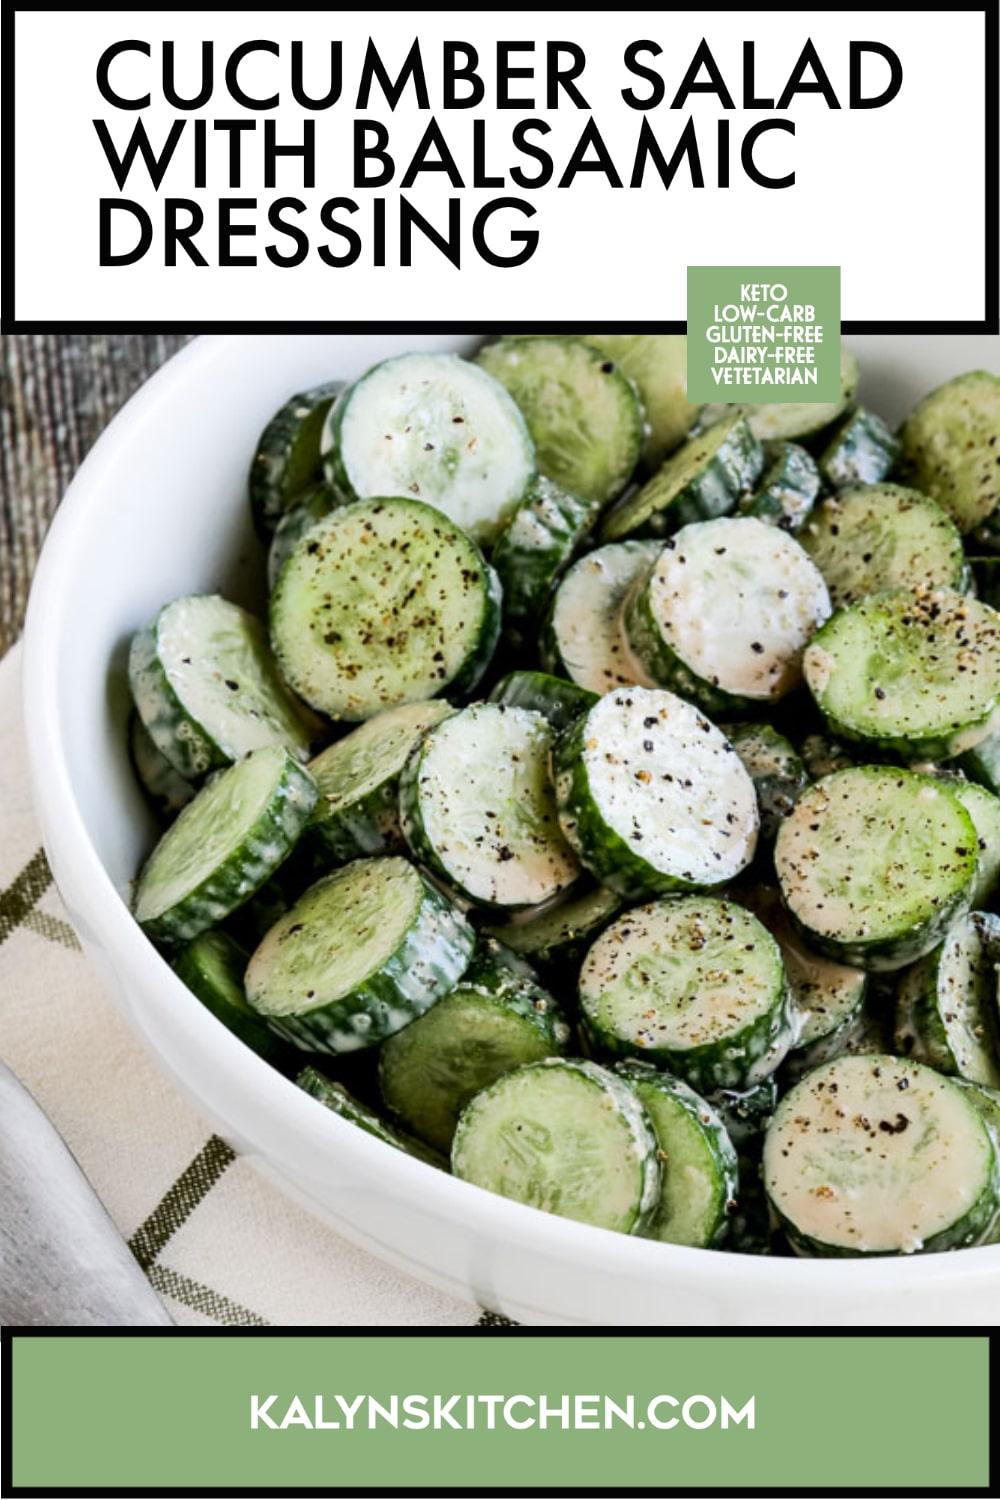 Pinterest image of Cucumber Salad with Balsamic Dressing